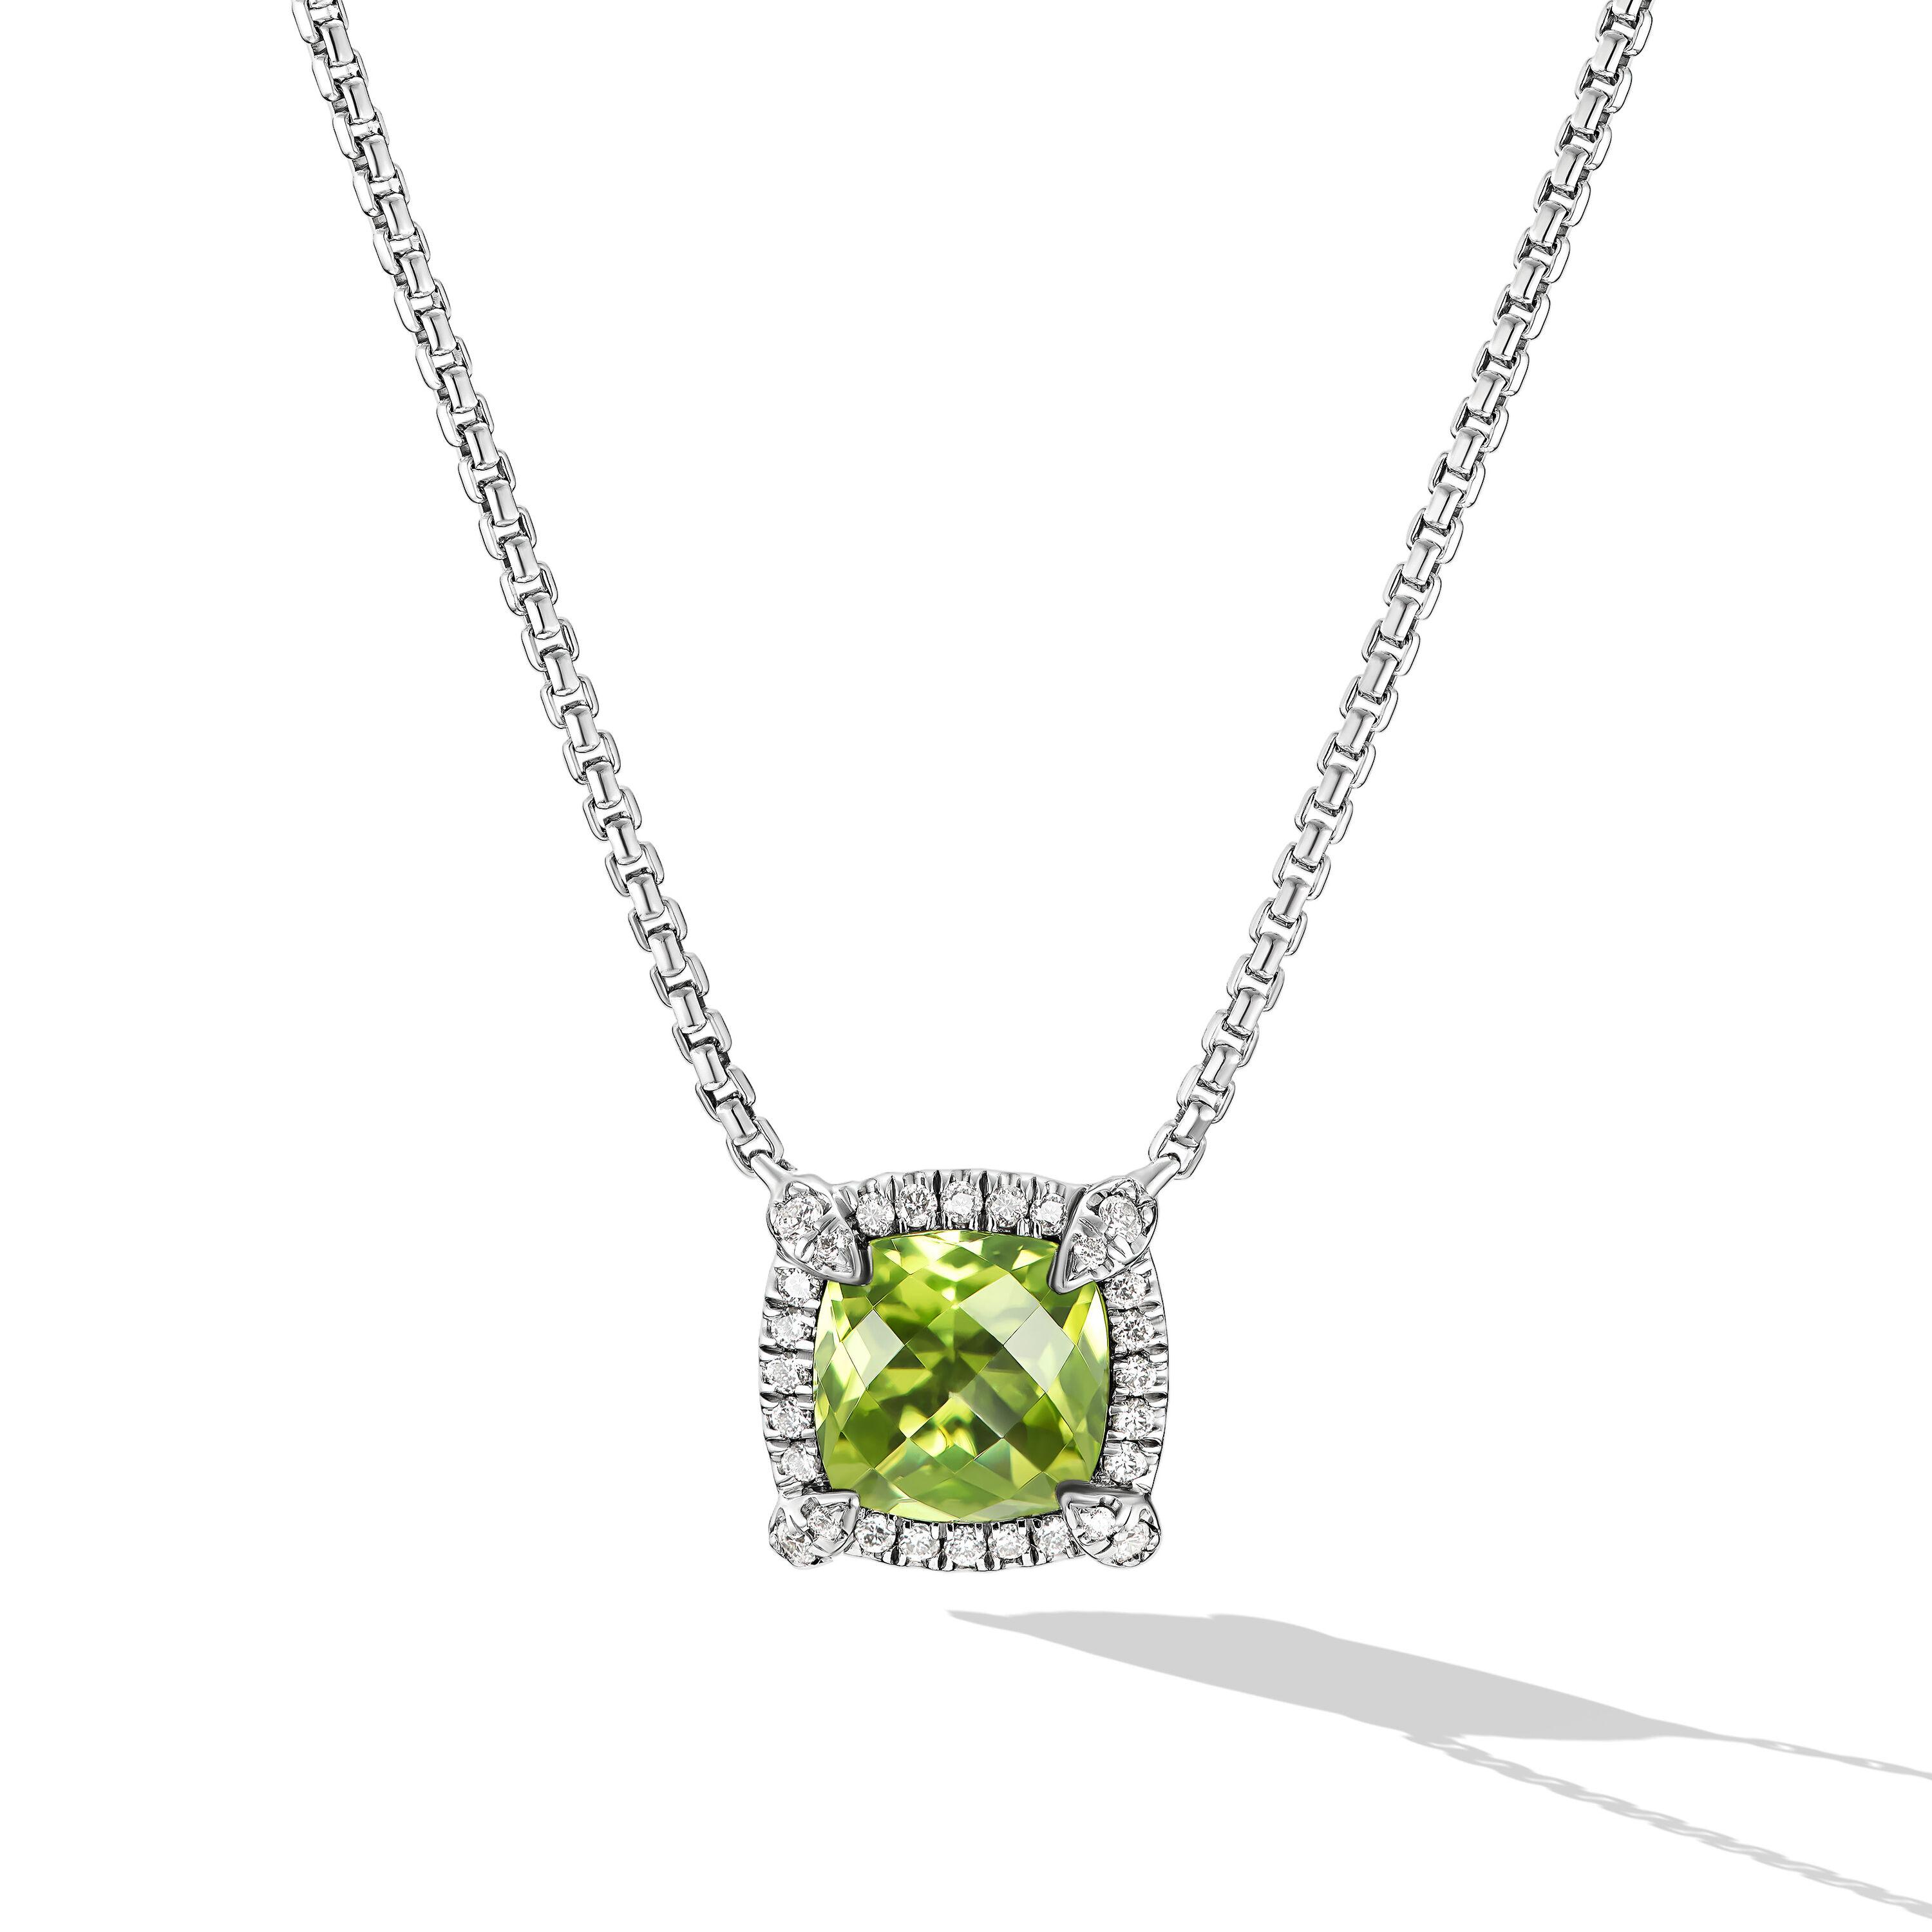 David Yurman Petite Chatelaine Pave Bezel Pendant Necklace in Sterling Silver with Peridot and Diamonds